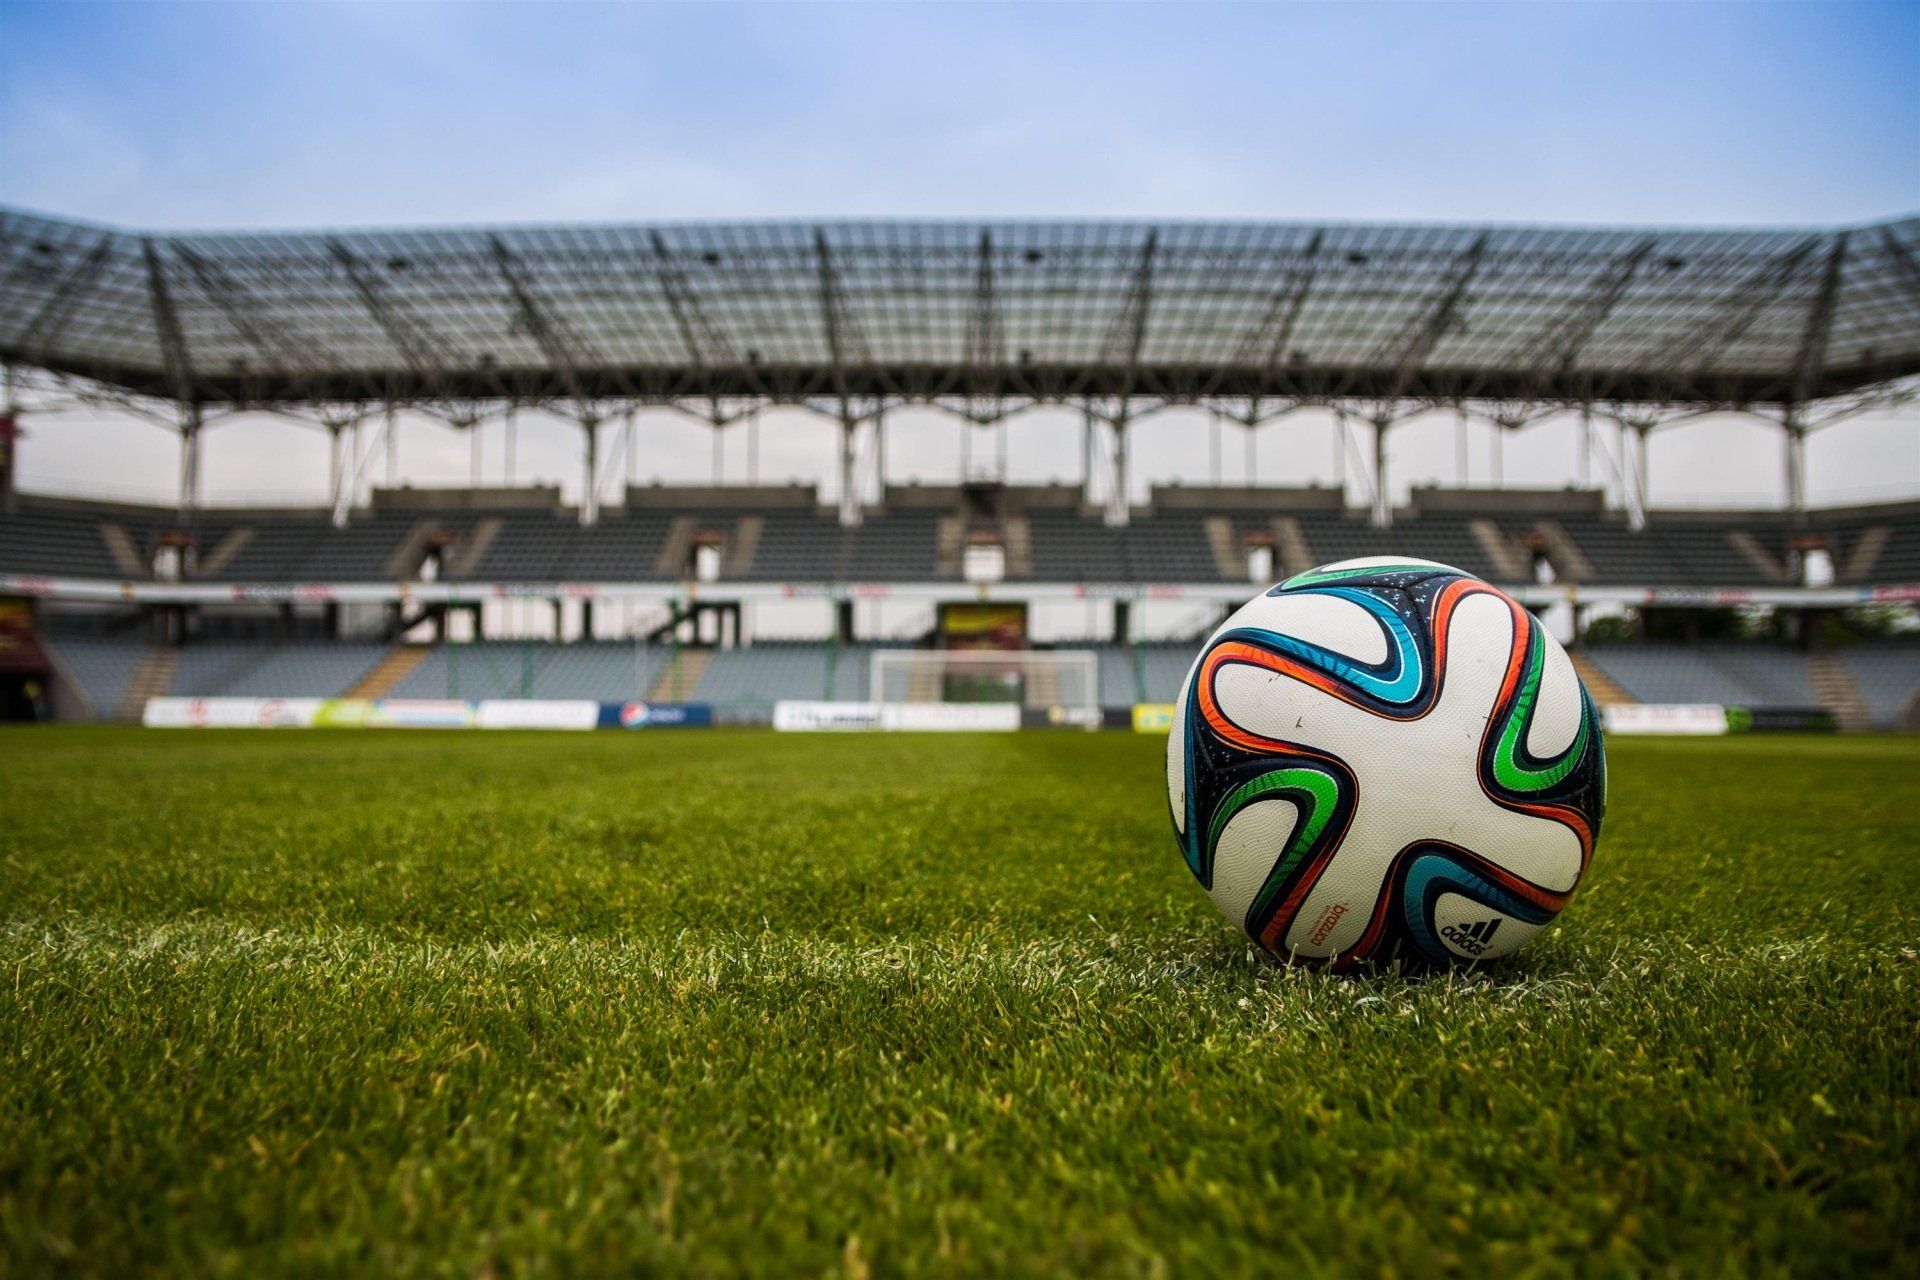 A soccer ball is sitting on the grass in front of a stadium.